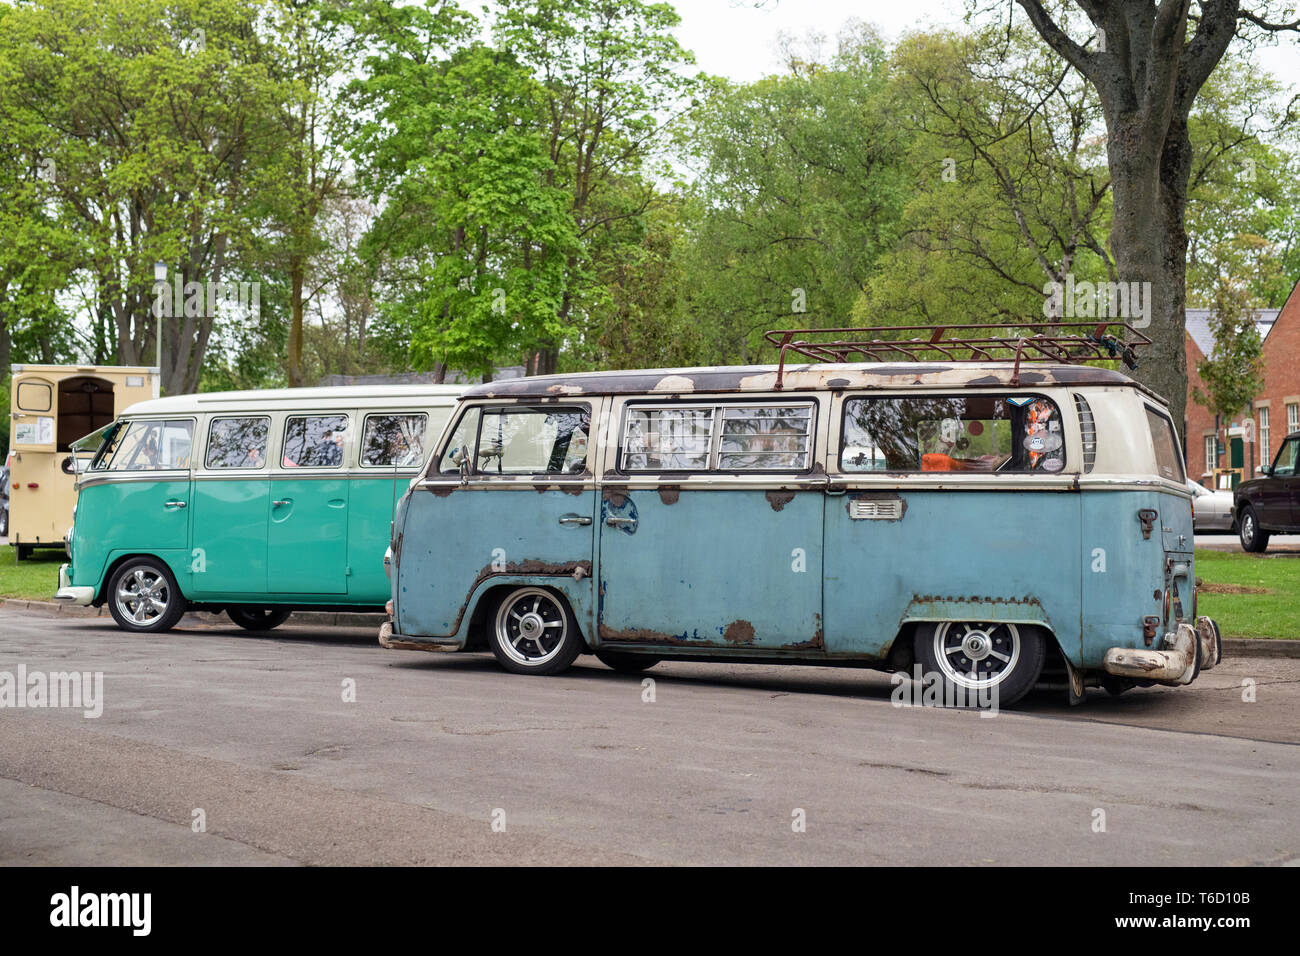 1966 VW Split Screen Volkswagen camper van and a 1970 Volkswagen camper van.  Bicester heritage centre 'Drive It Day'. Bicester, Oxfordshire, England  Stock Photo - Alamy